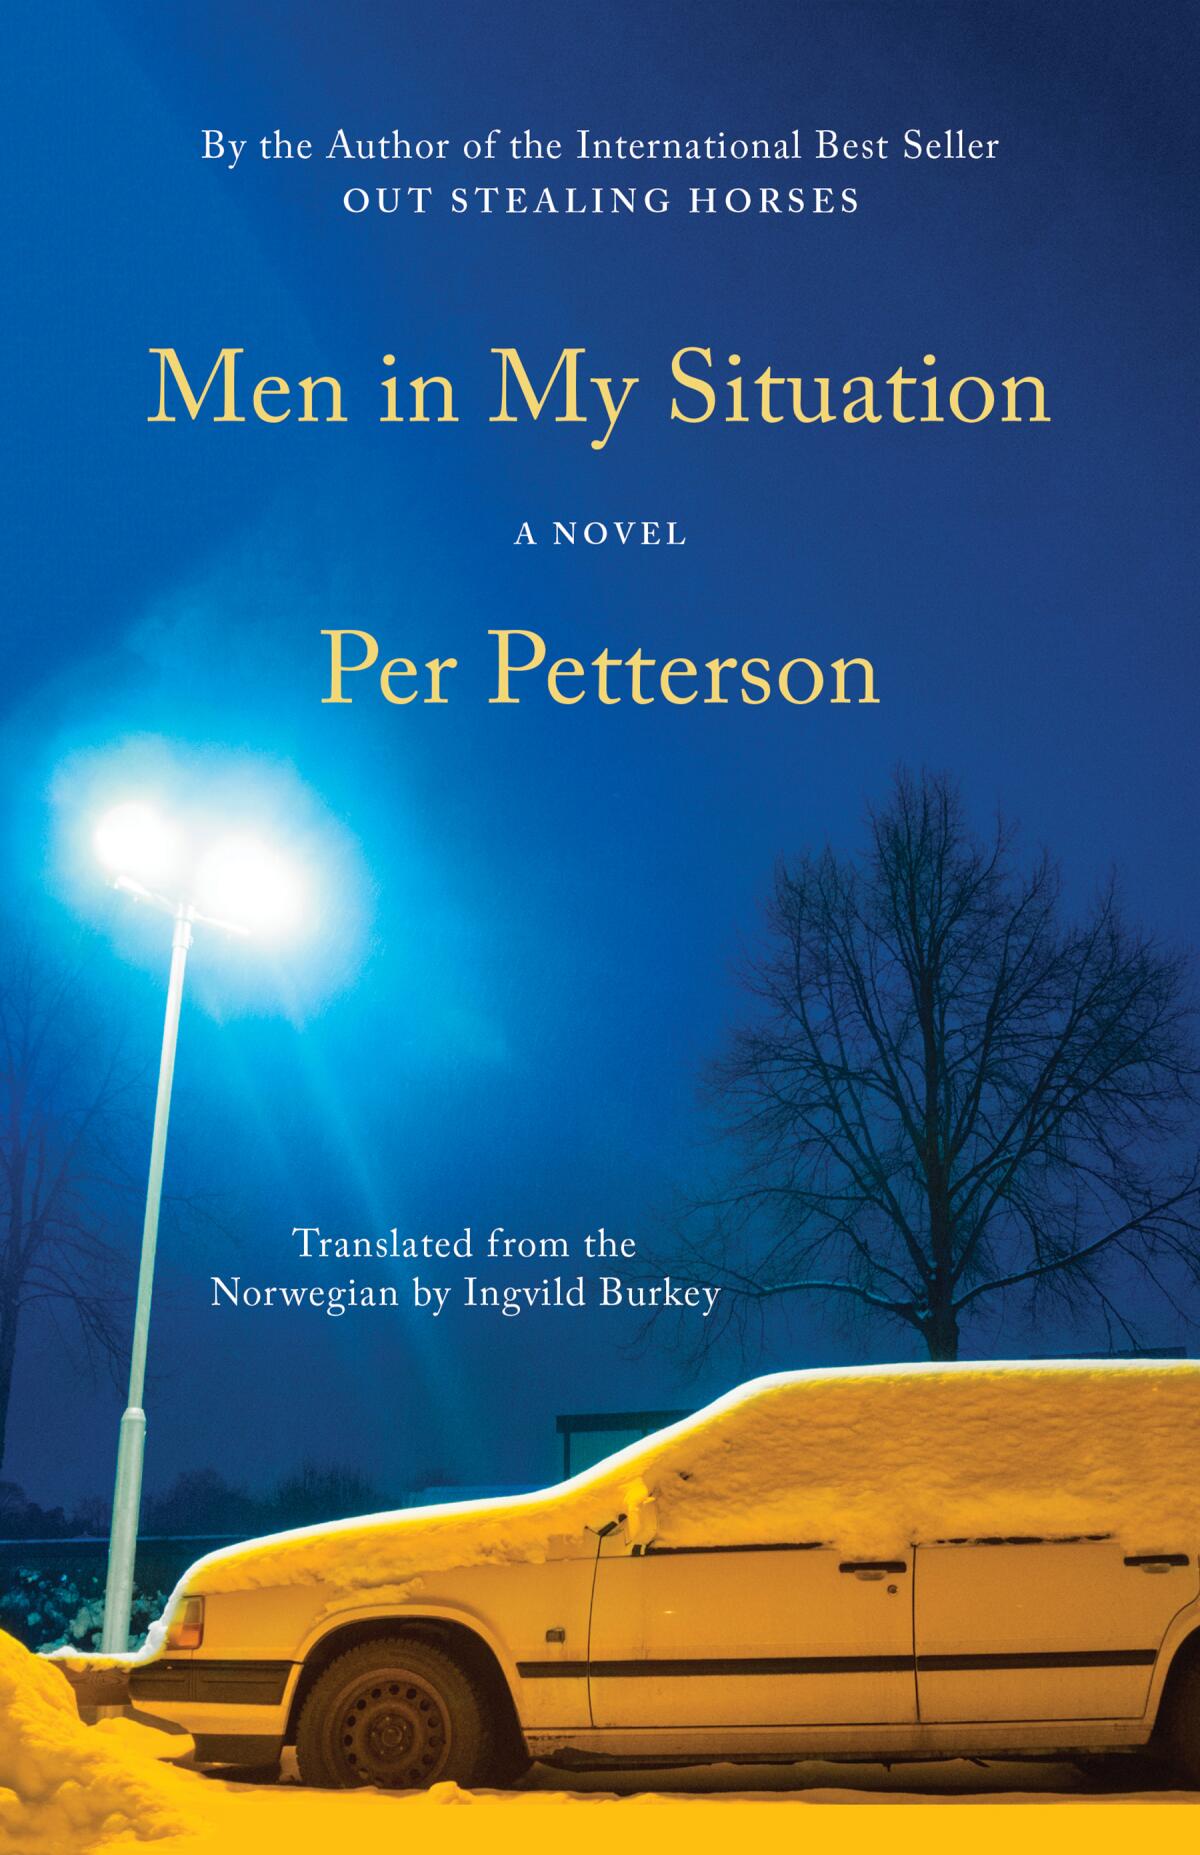 "Men in My Situation," by Per Petterson